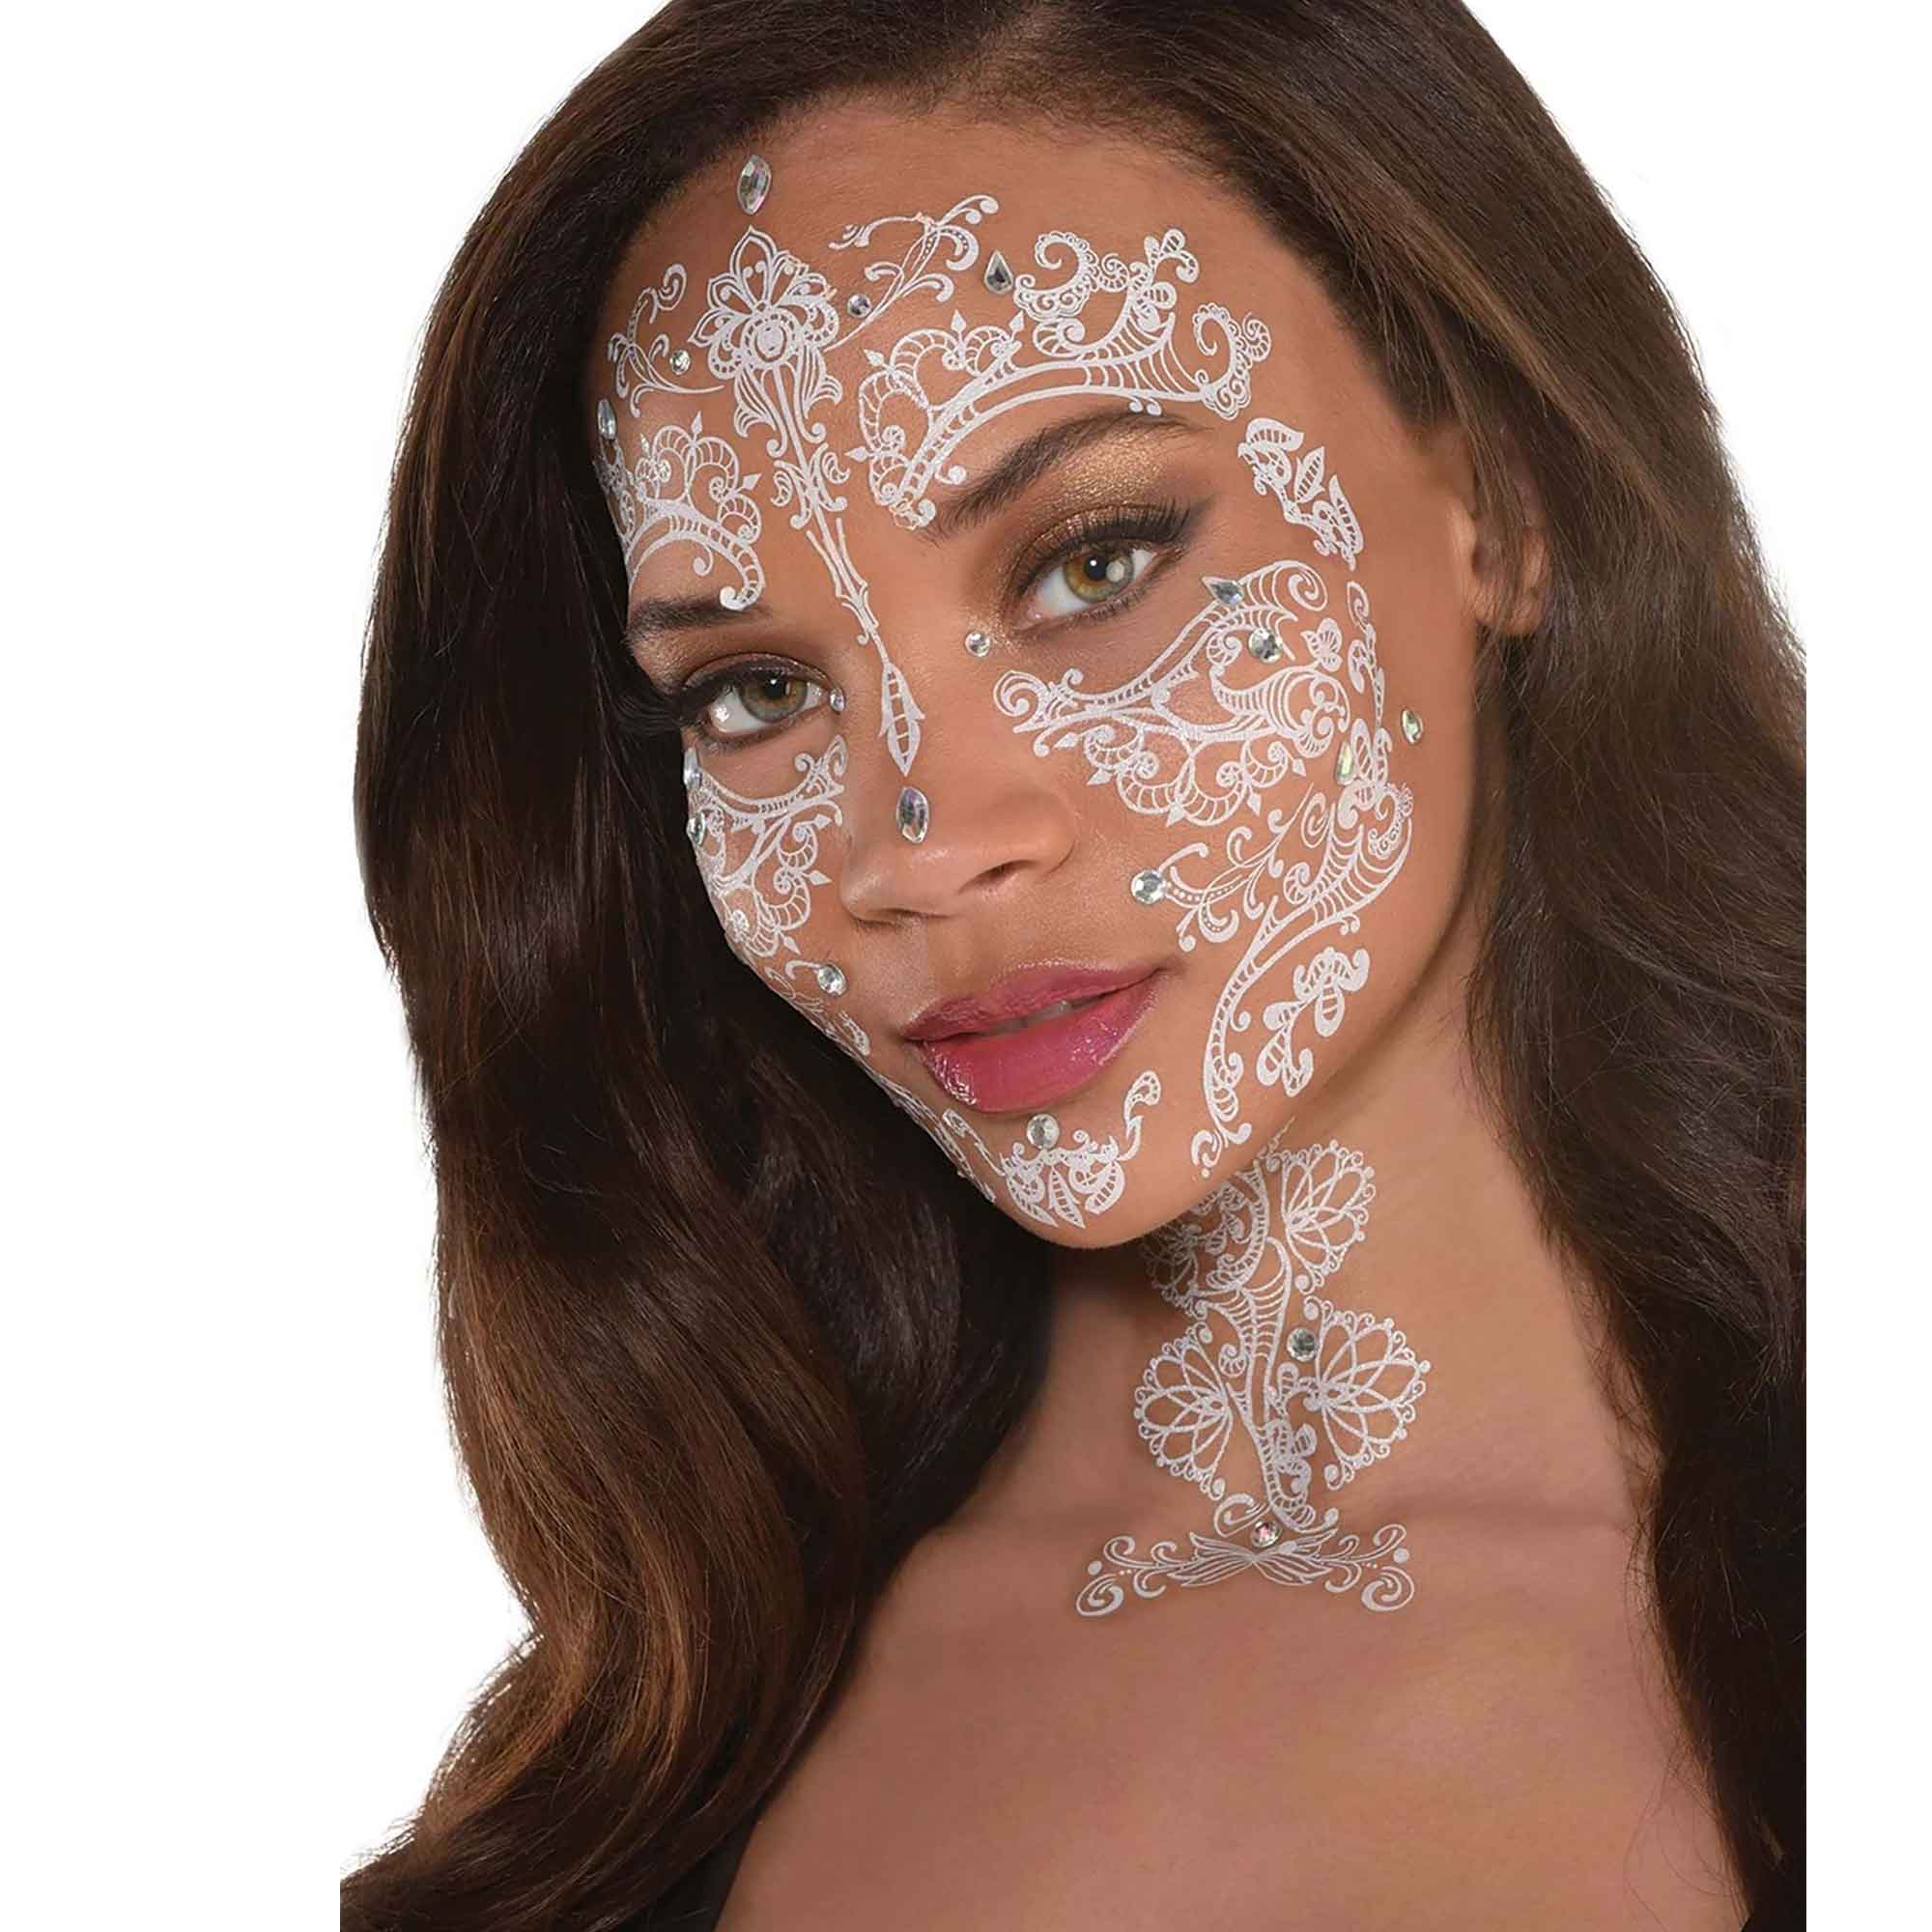 Adult Lace Face Tattoo Kit  One Size